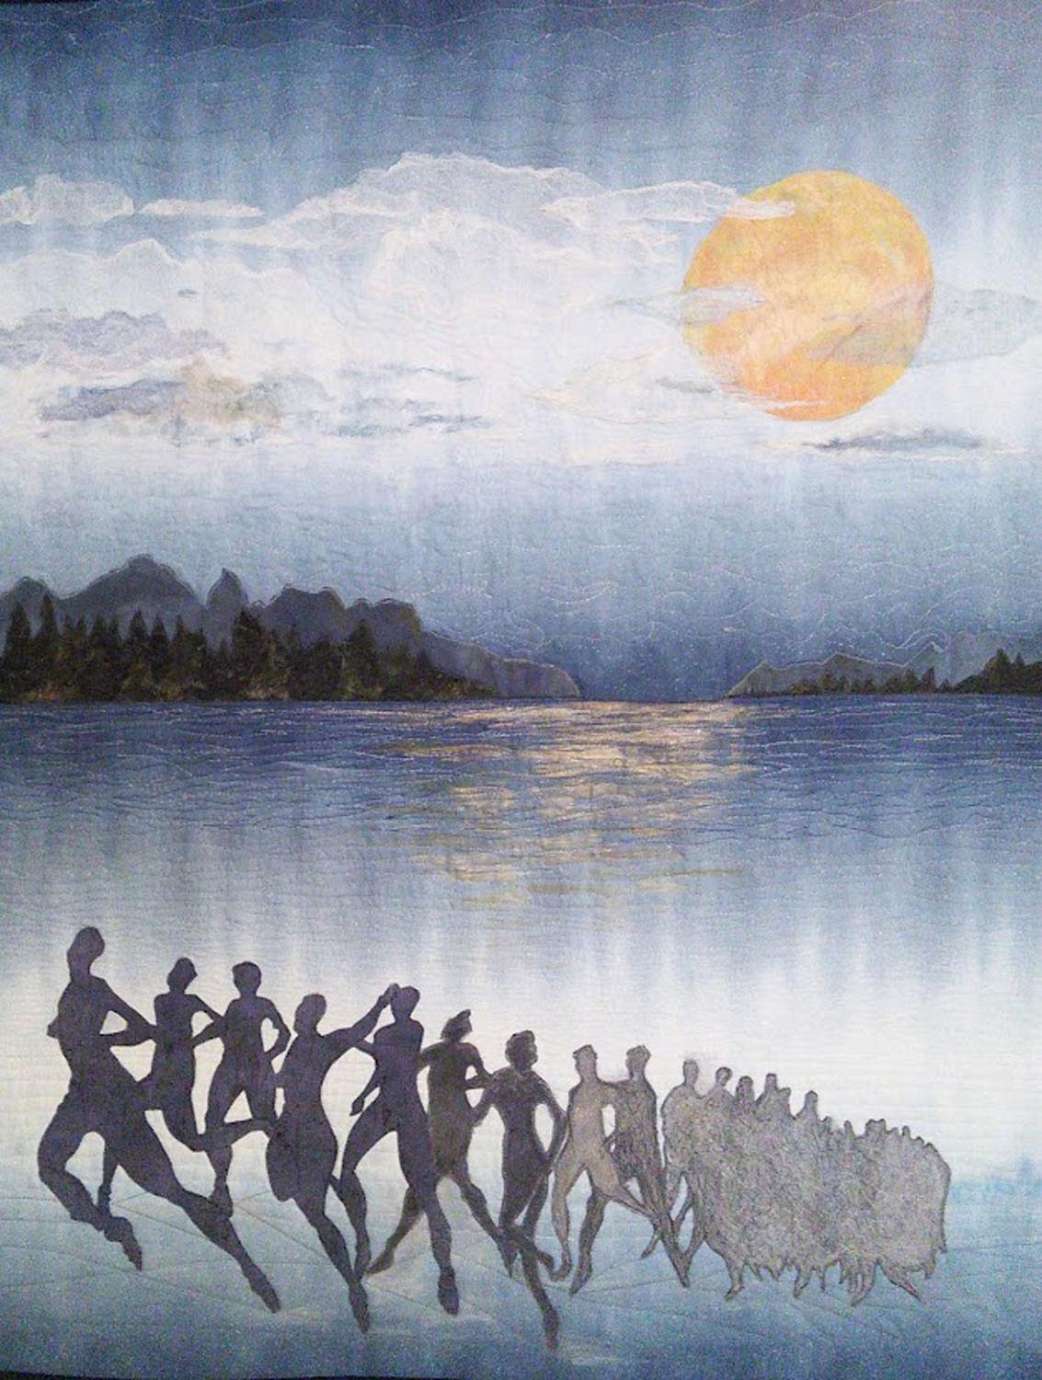 A quilt depicting a night sky over a lake with an orange moon in the background and a group of shadow people running up the bank